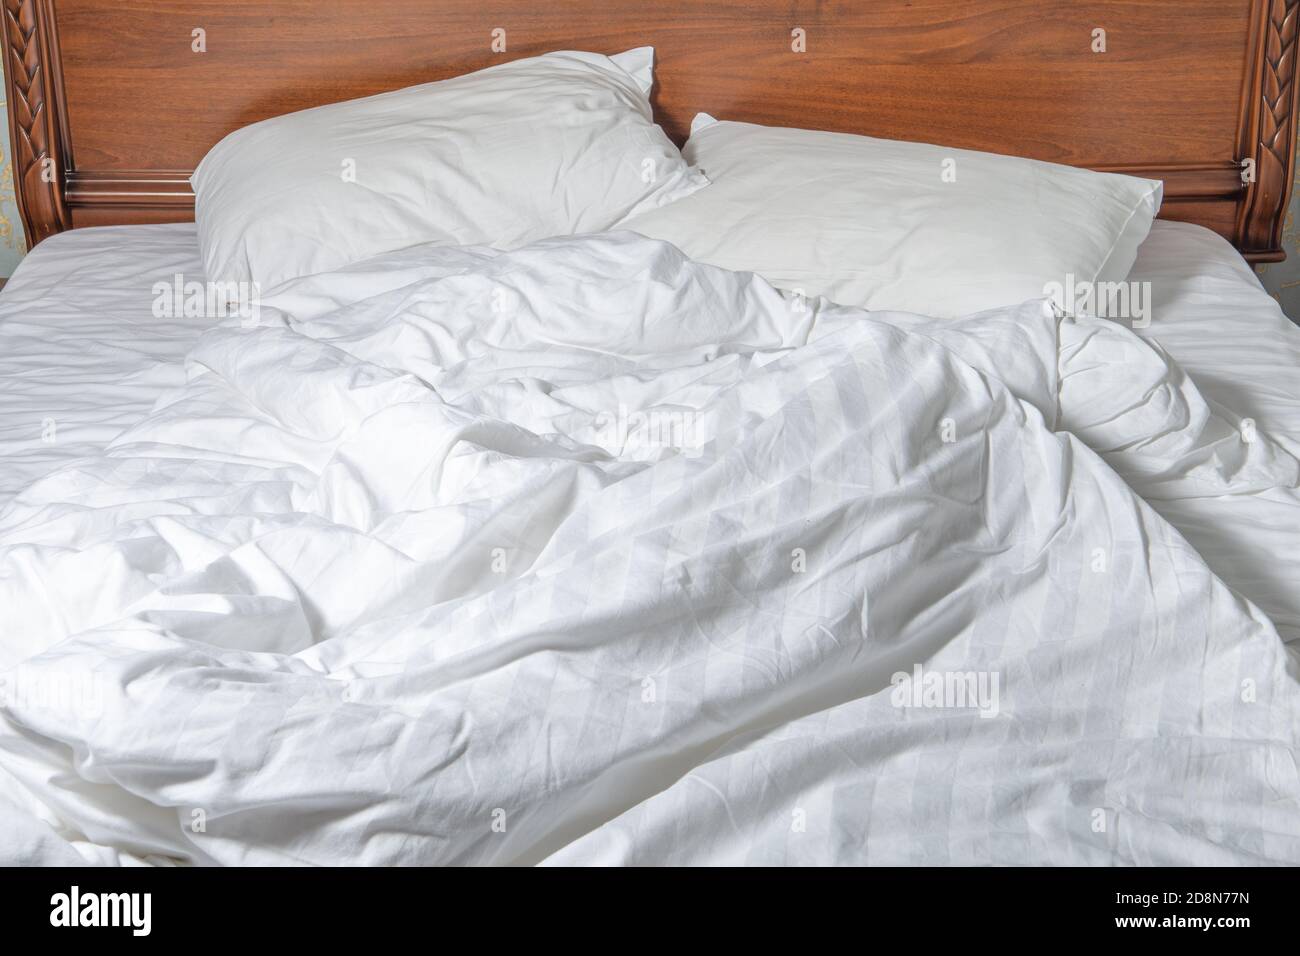 unmade bed with white linens. Unmade empty bed. Close up unmade bed sheet in the bedroom after night sleep Stock Photo